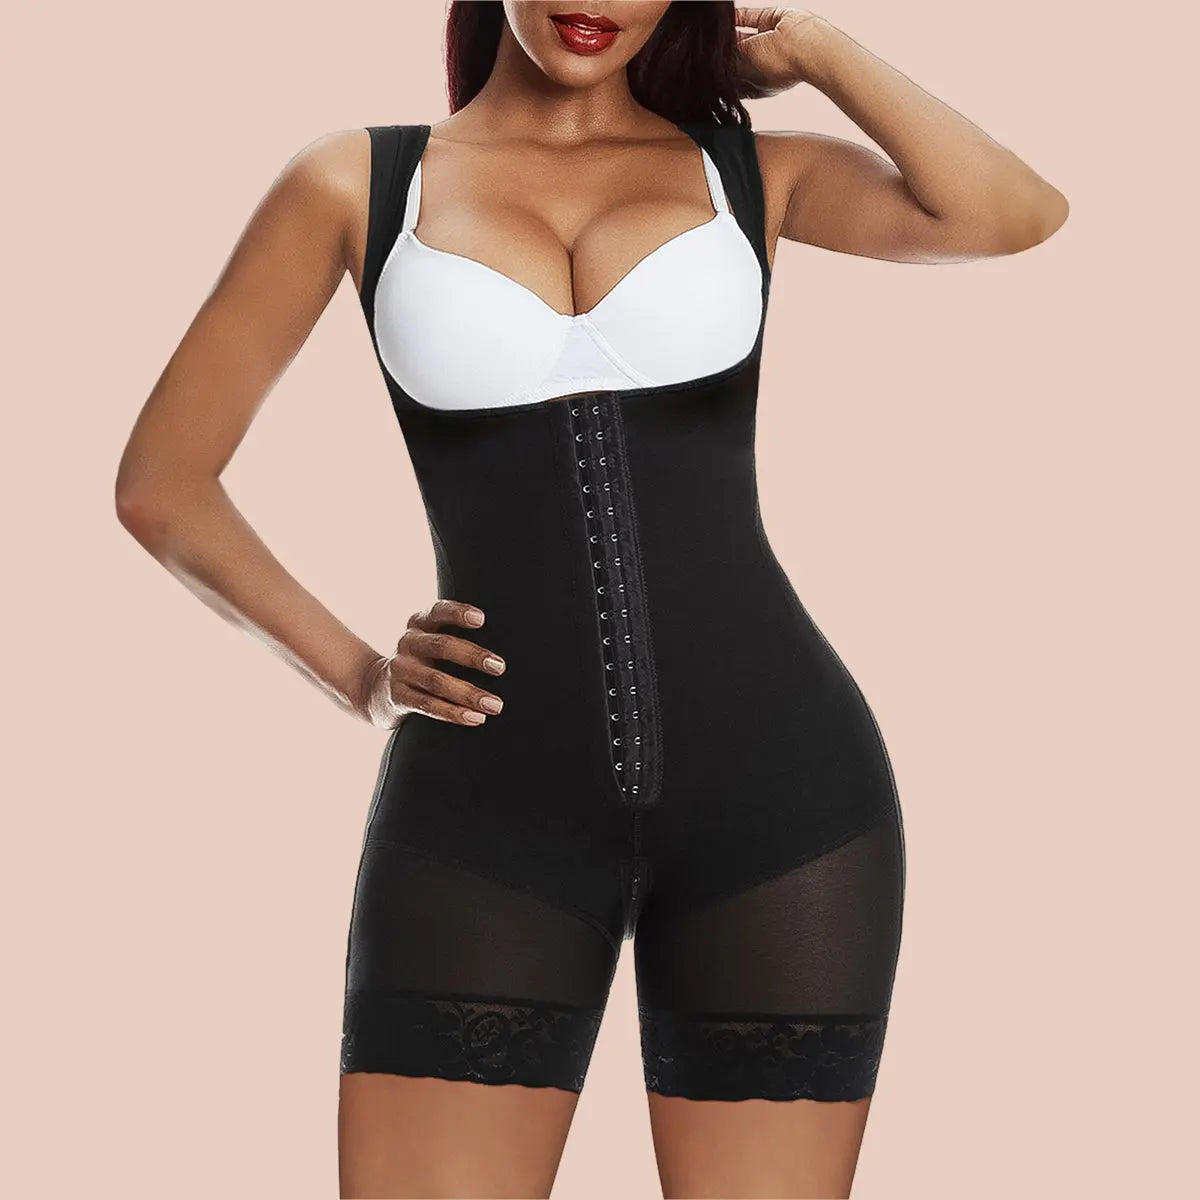 Current Favorite Body Shaper from ShaperX 